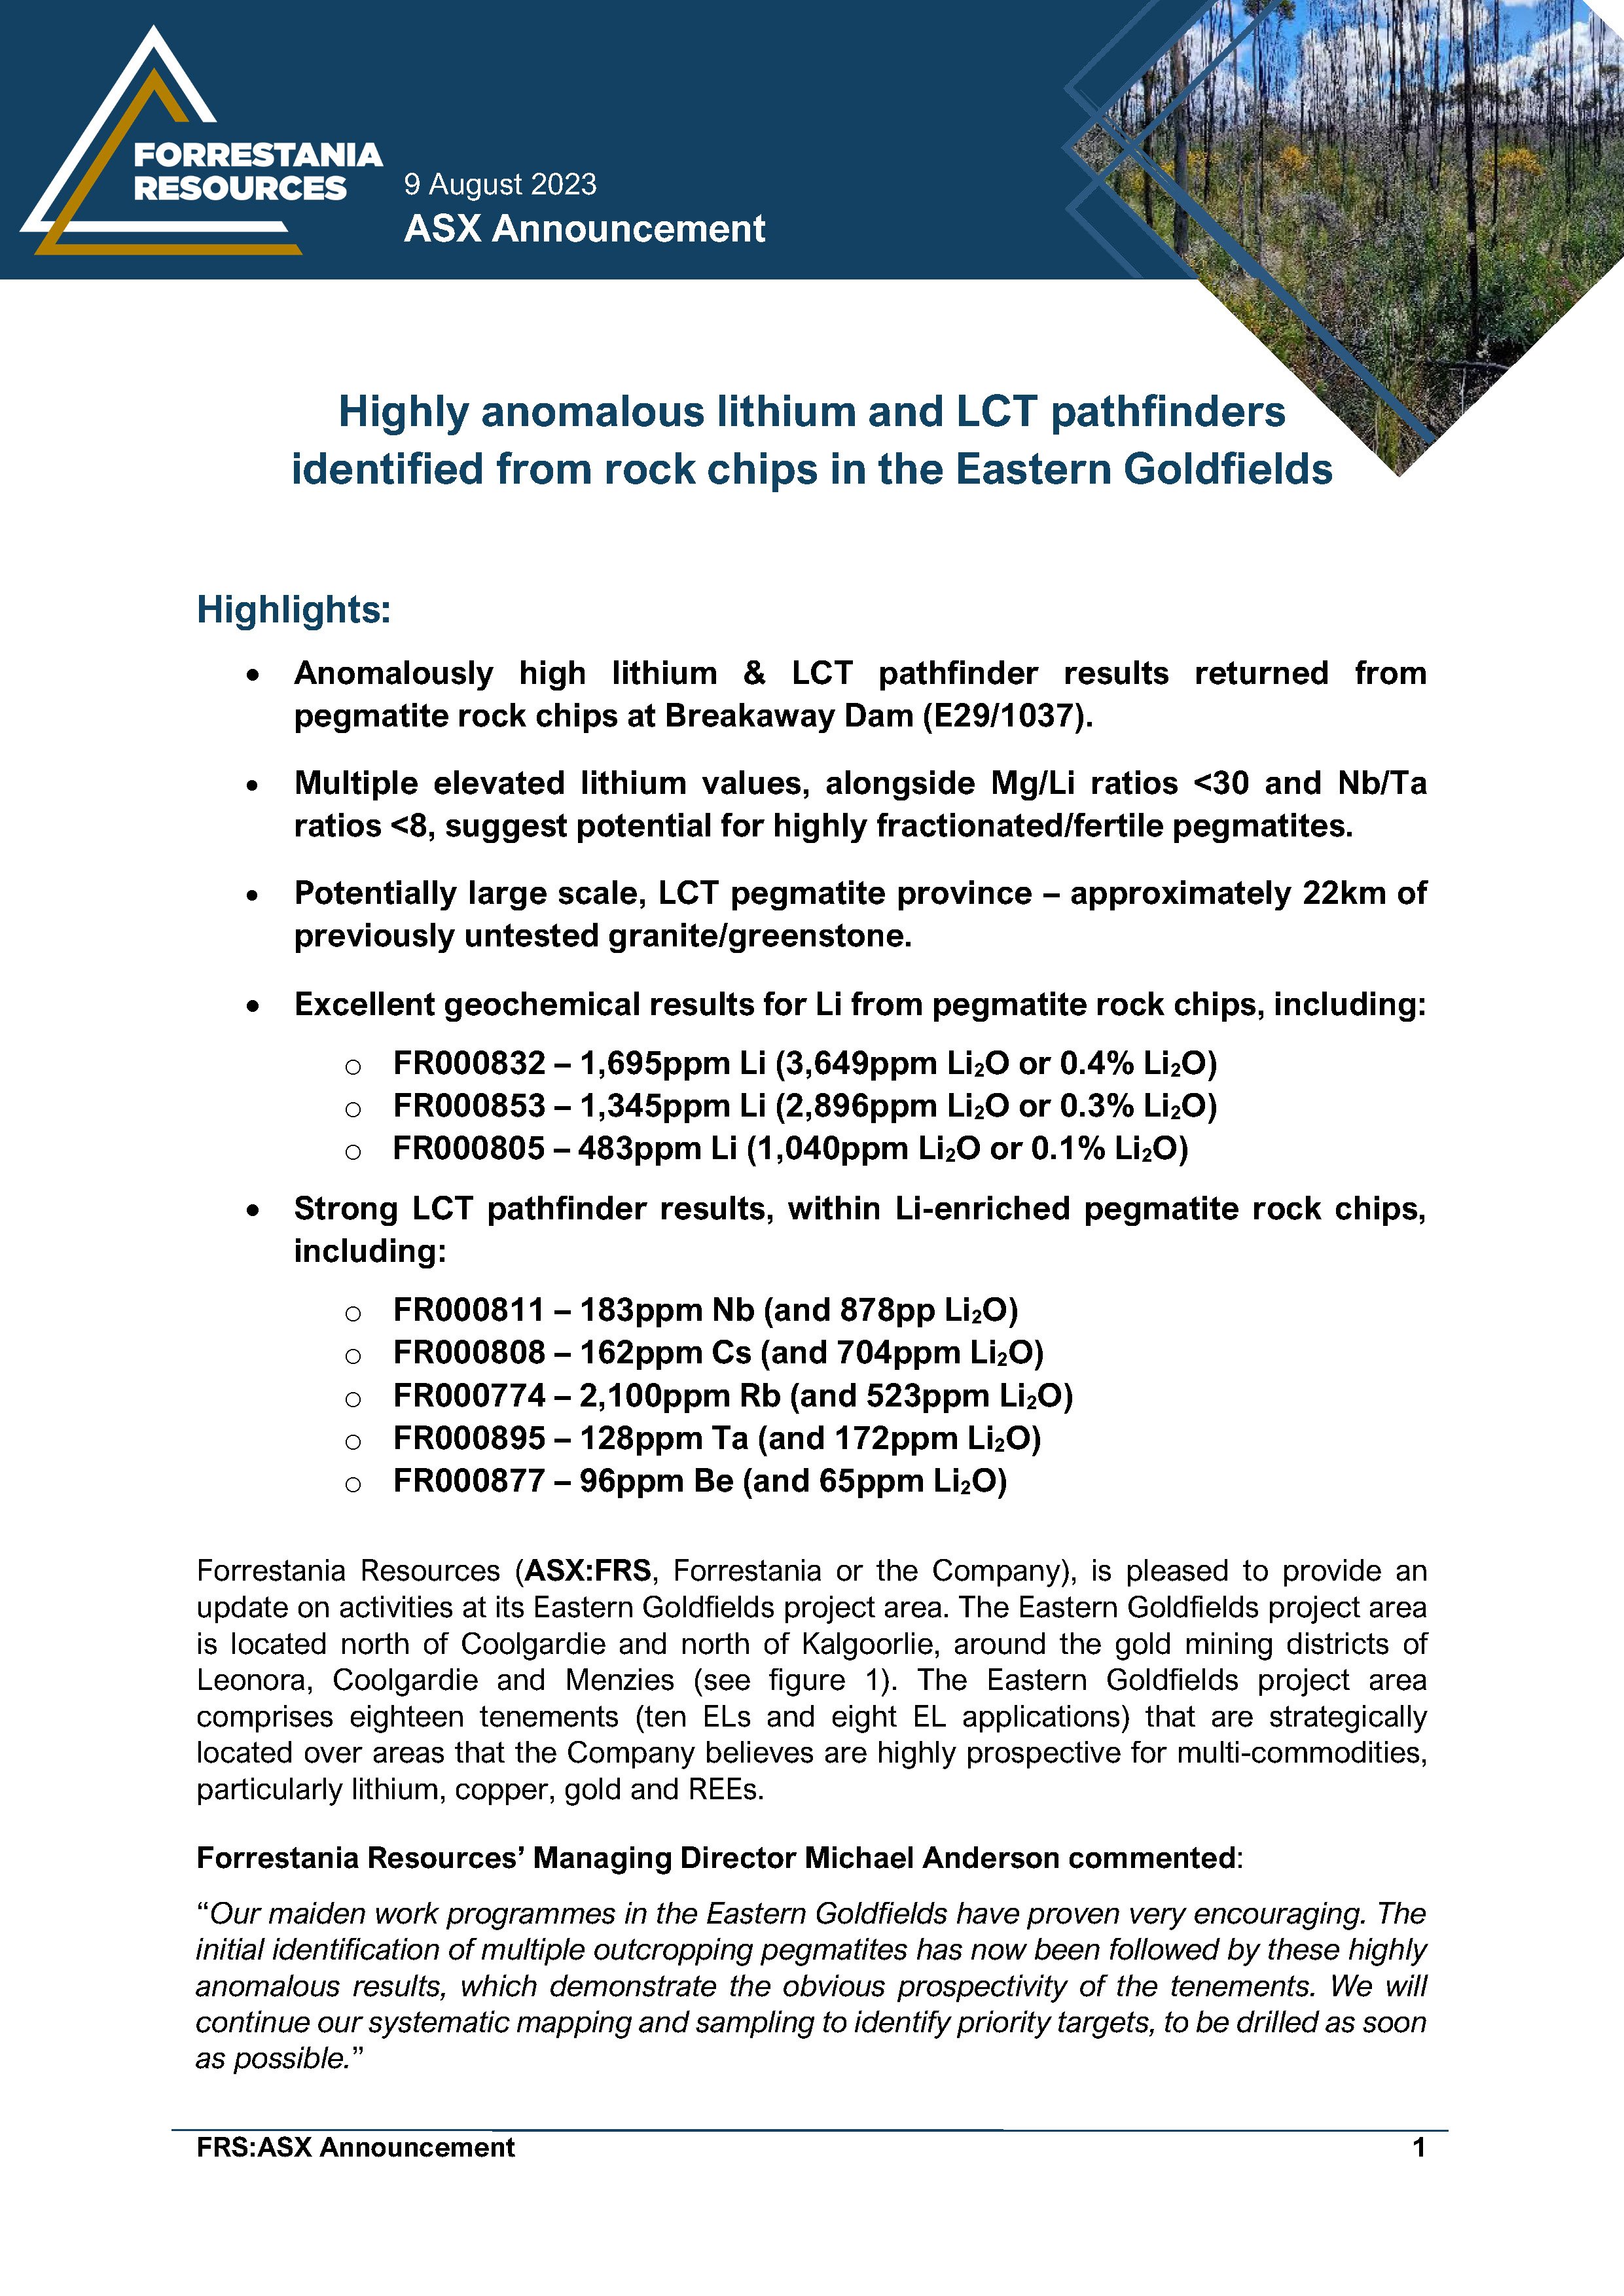 Highly anomalous lithium and LCT pathfinders identified from rock chips in the Eastern Goldfields